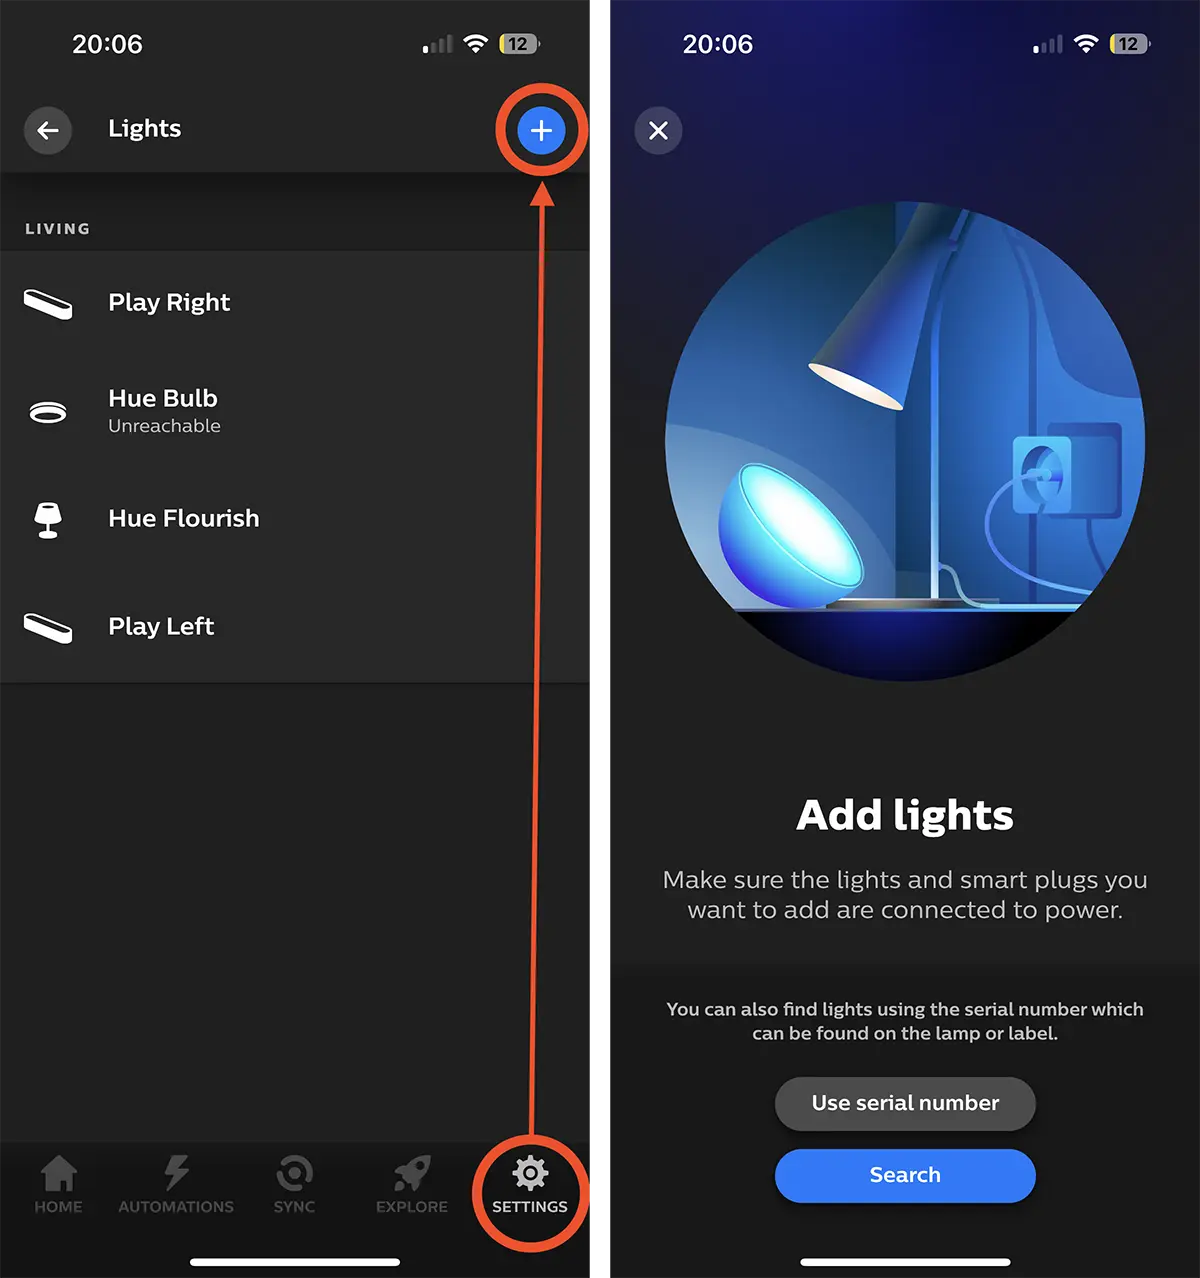 How to connect smart Hue lights to the Philips Hue Bridge